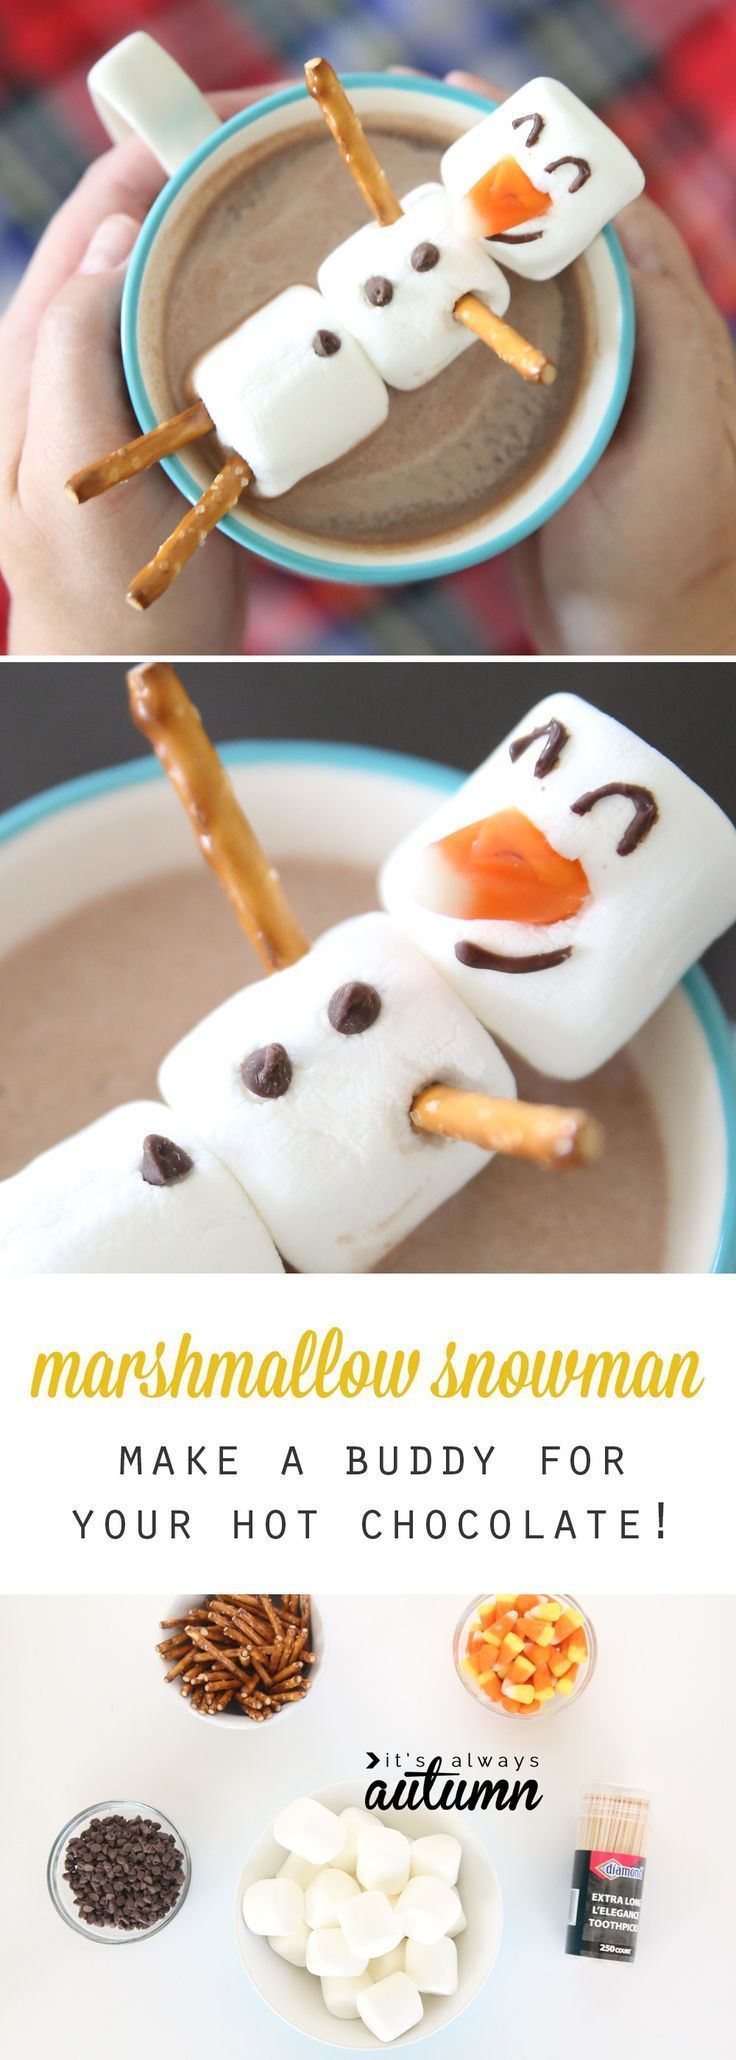 Over 30 Winter Themed Fun Food Ideas and Easy Crafts Kids Can Make -   18 xmas food for kids ideas